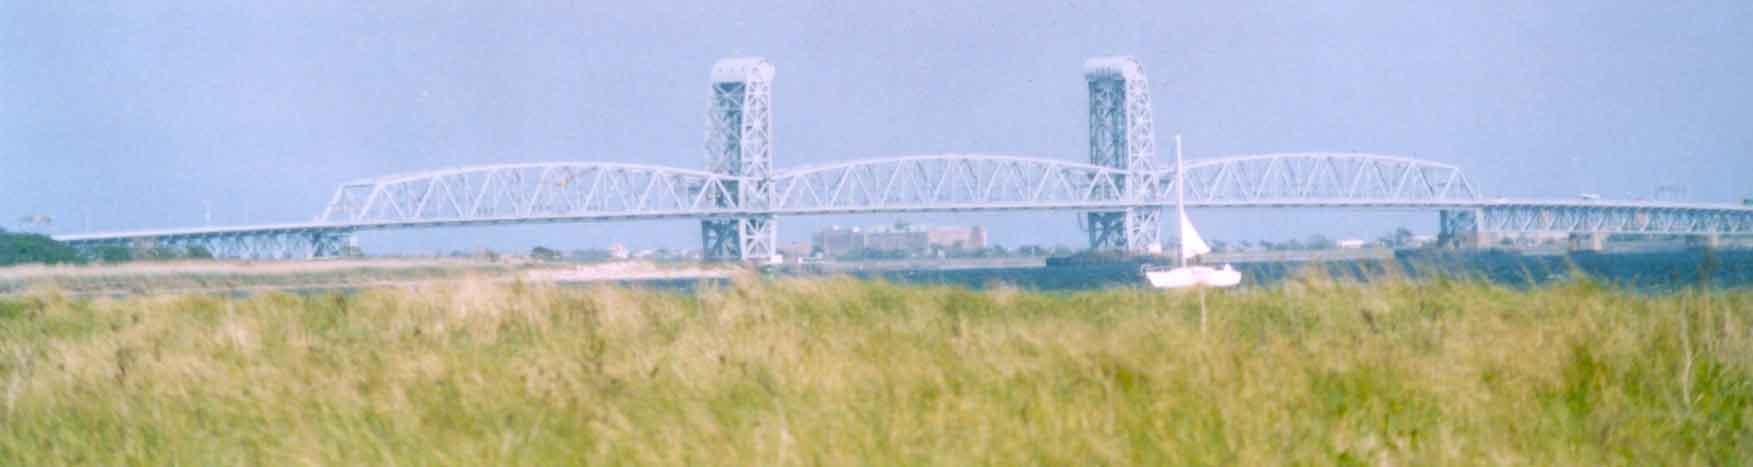 Marine Parkway - Gil Hodges Bridge, connecting Floyd Bennett Field in Brooklyn with Breezy Point, Fort Tilden and Jacob Riis Park in Queens.